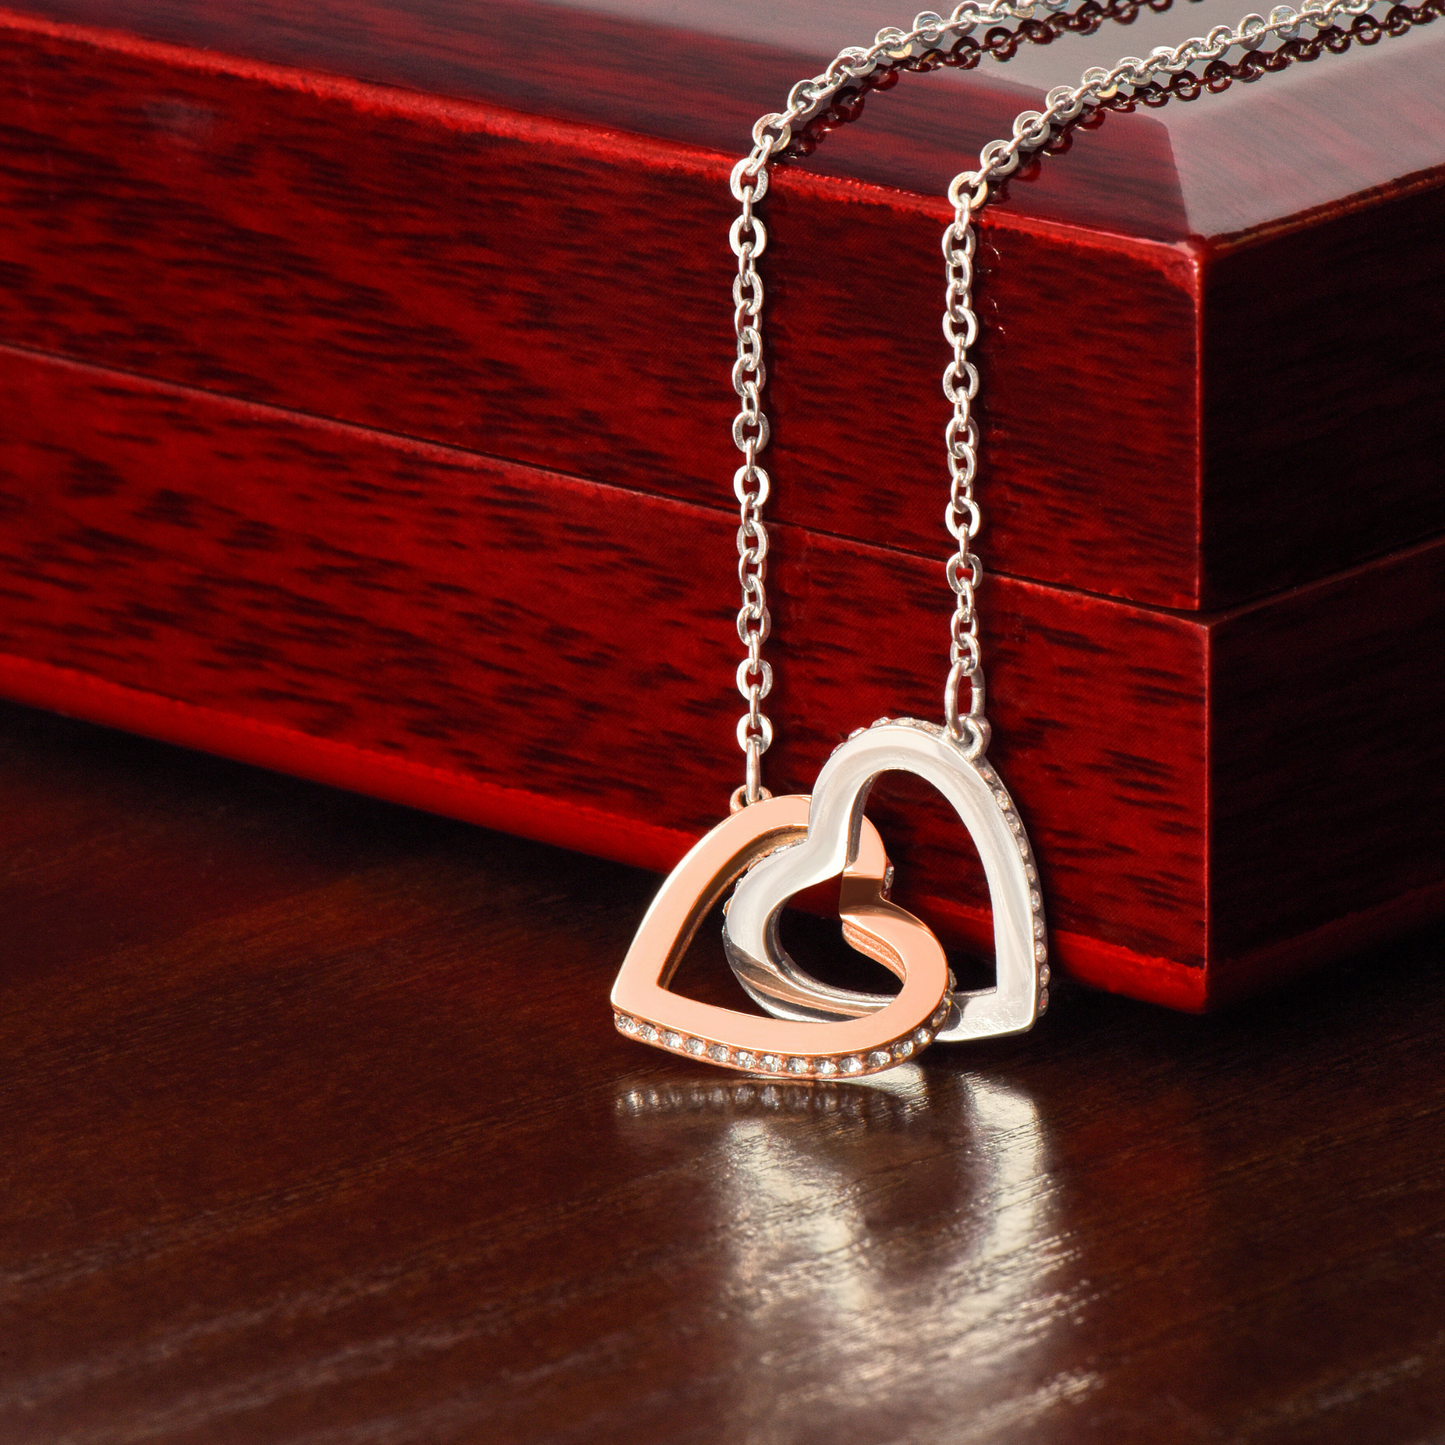 To My Beautiful Wife, In His Time, Interlocking Hearts Pendant Necklace